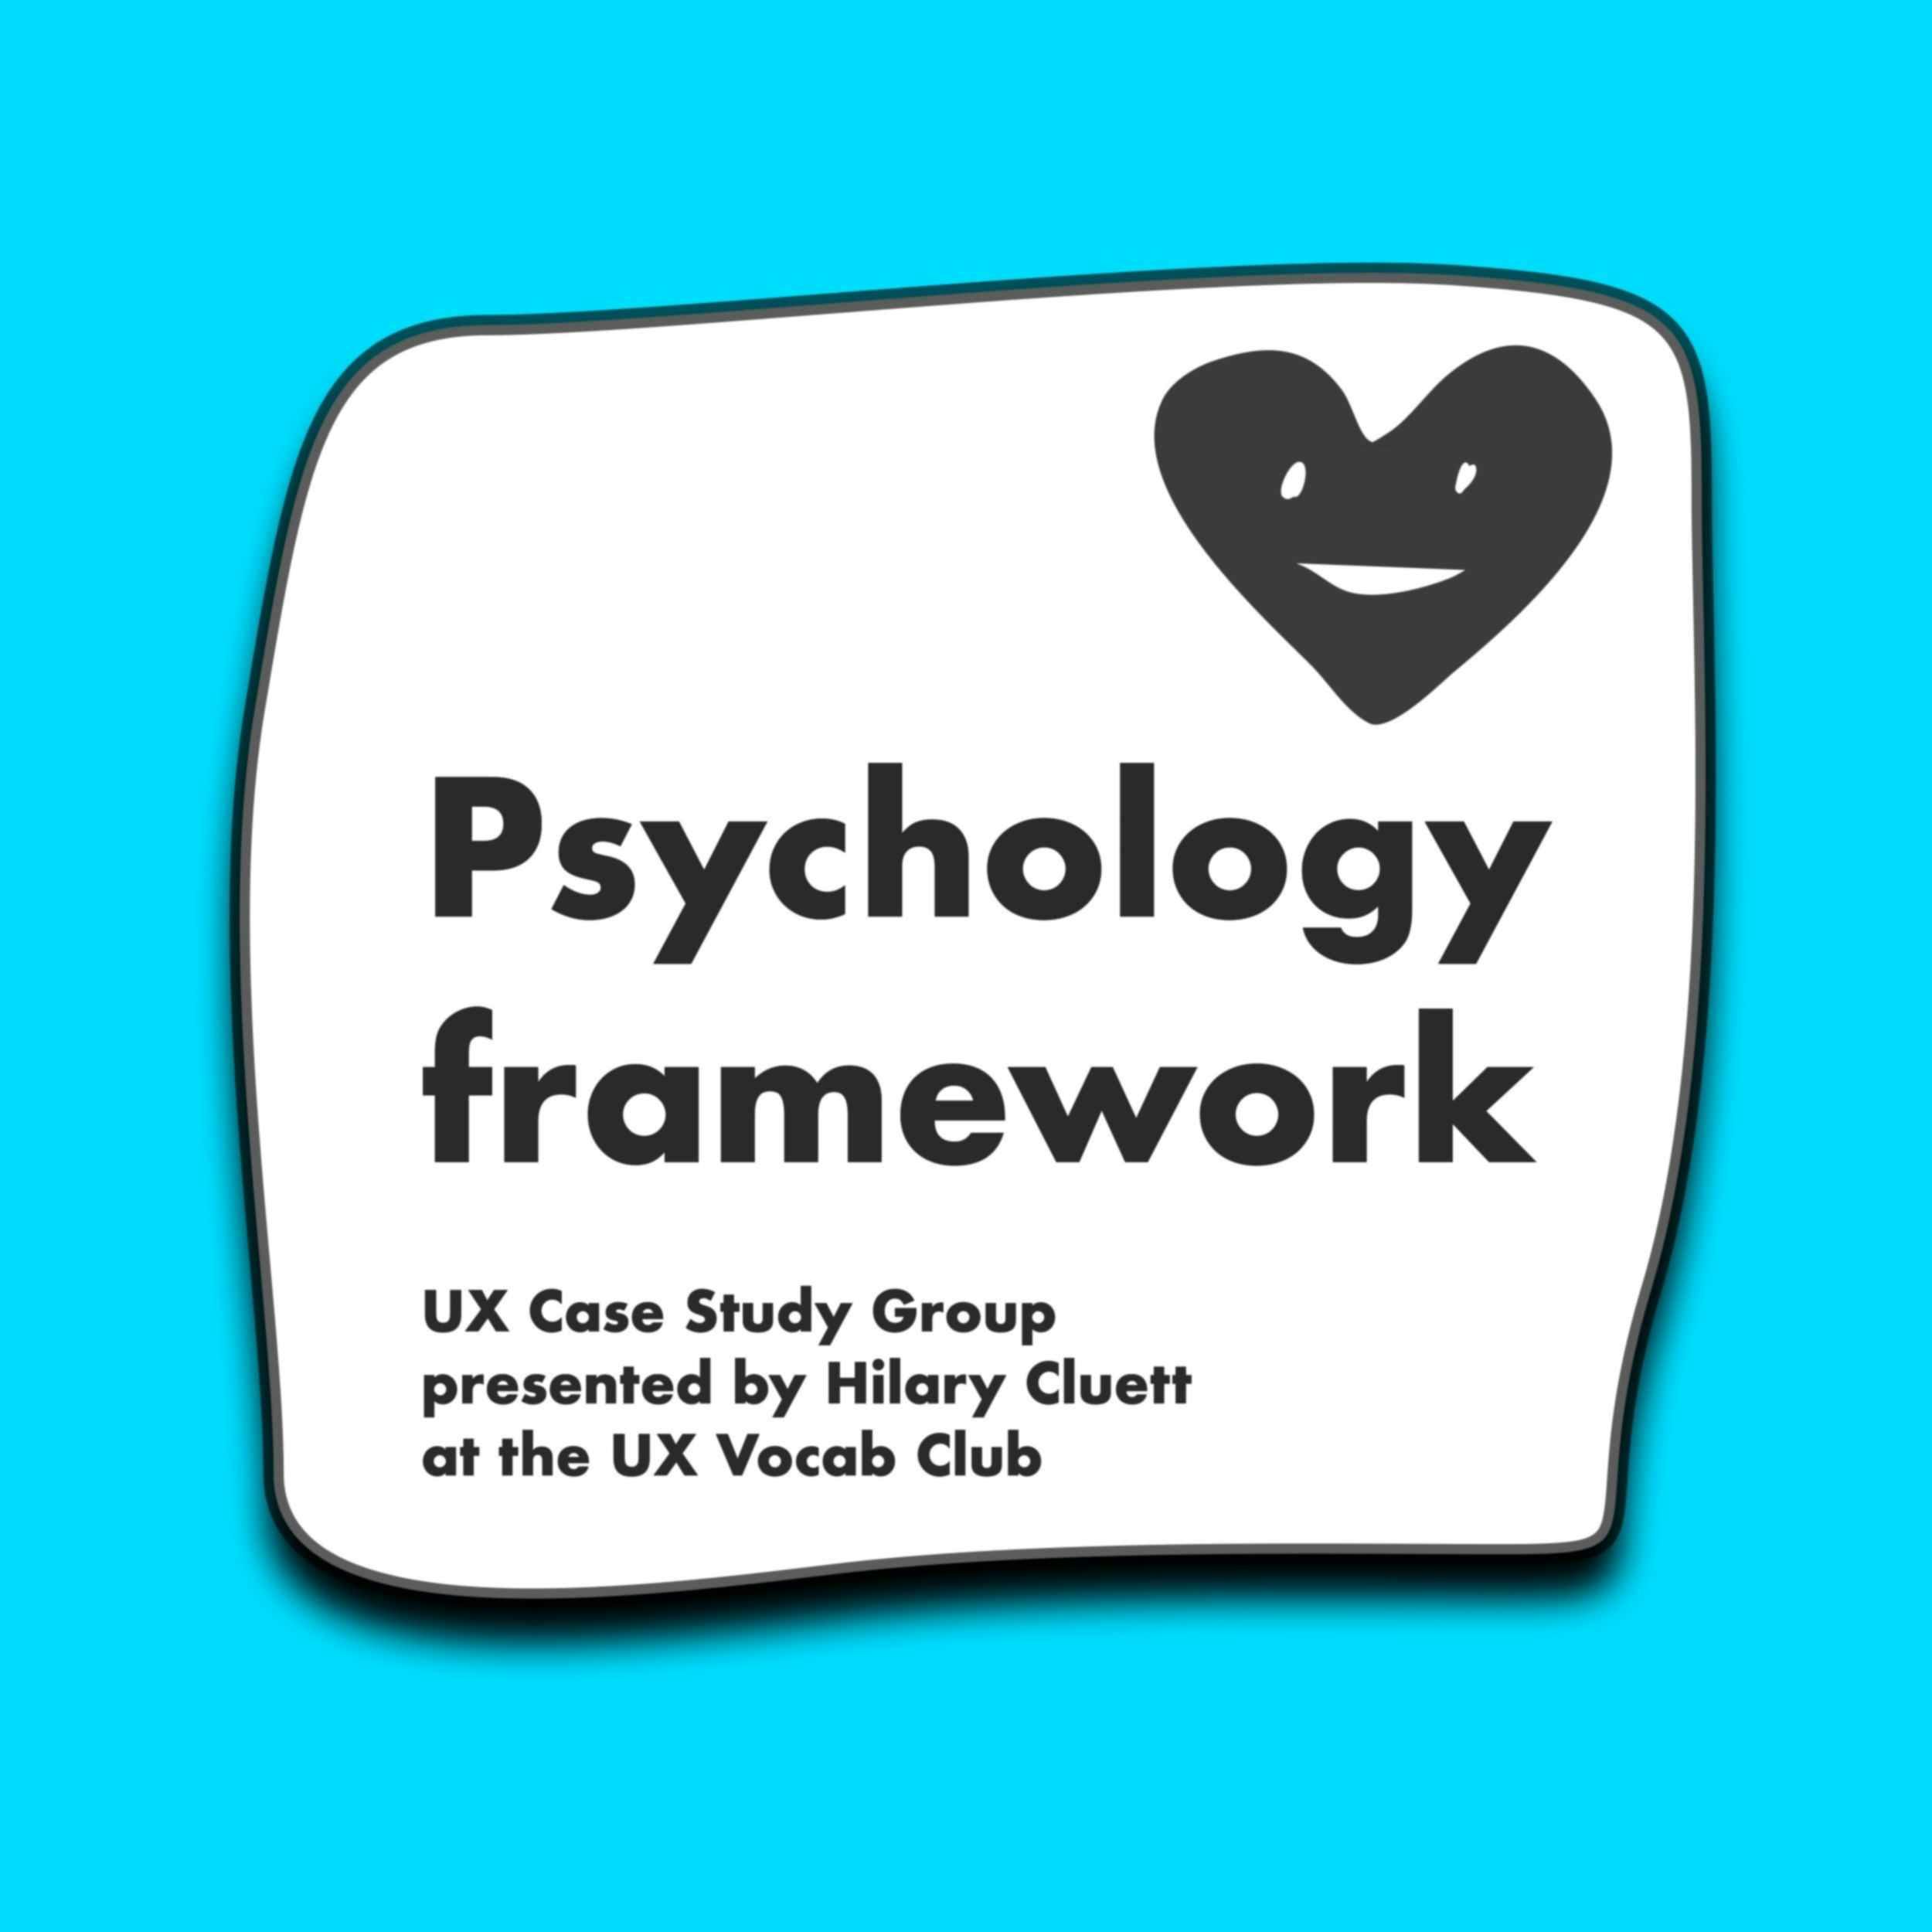 Psychology framework UX Case Study Group presented by Hilary Cluett at the UX Vocab Club